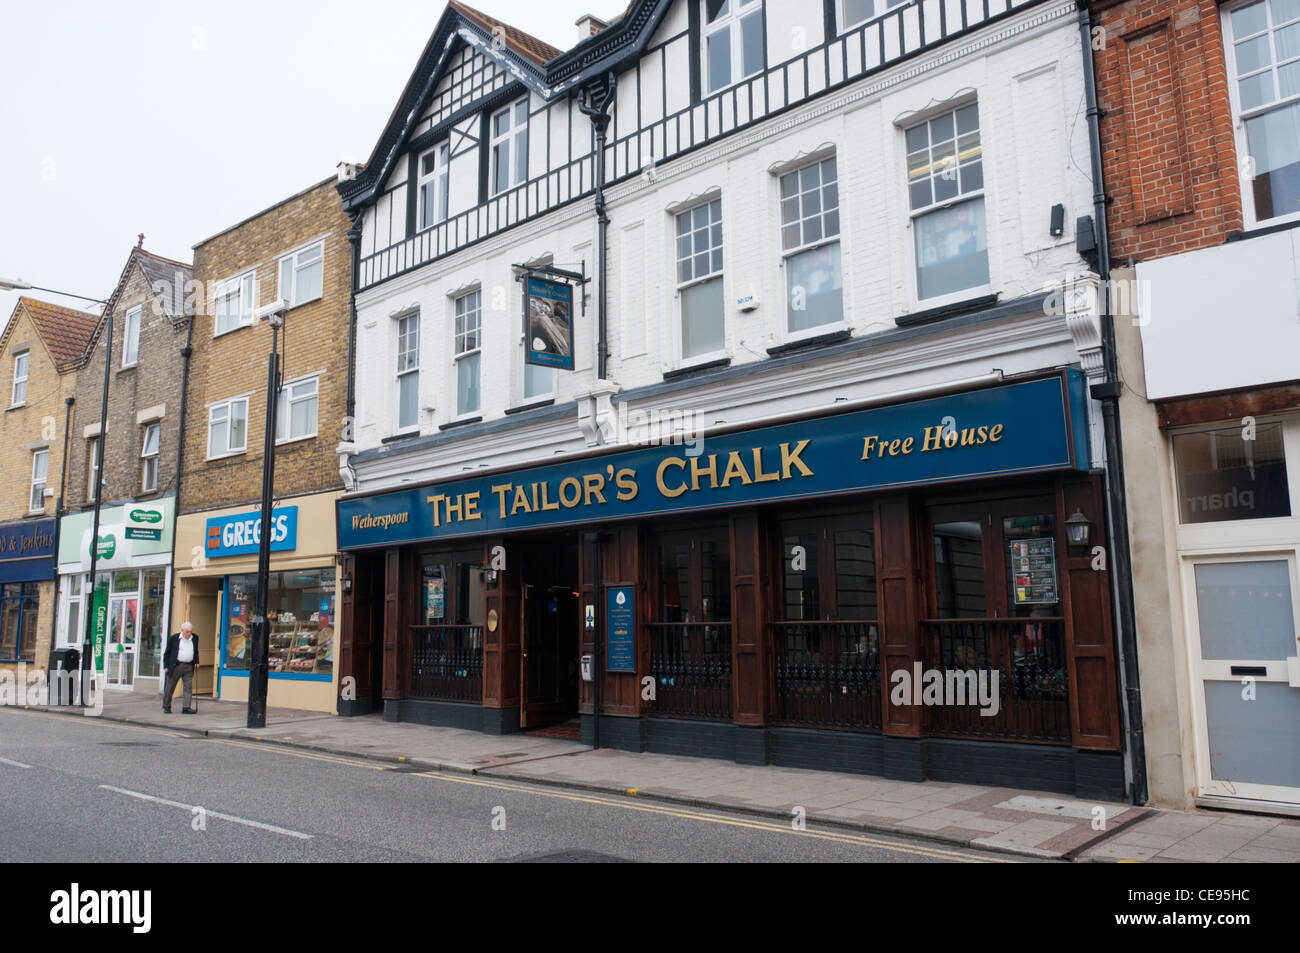 The Tailor's Chalk pub in Sidcup High Street, Kent. Stock Photo